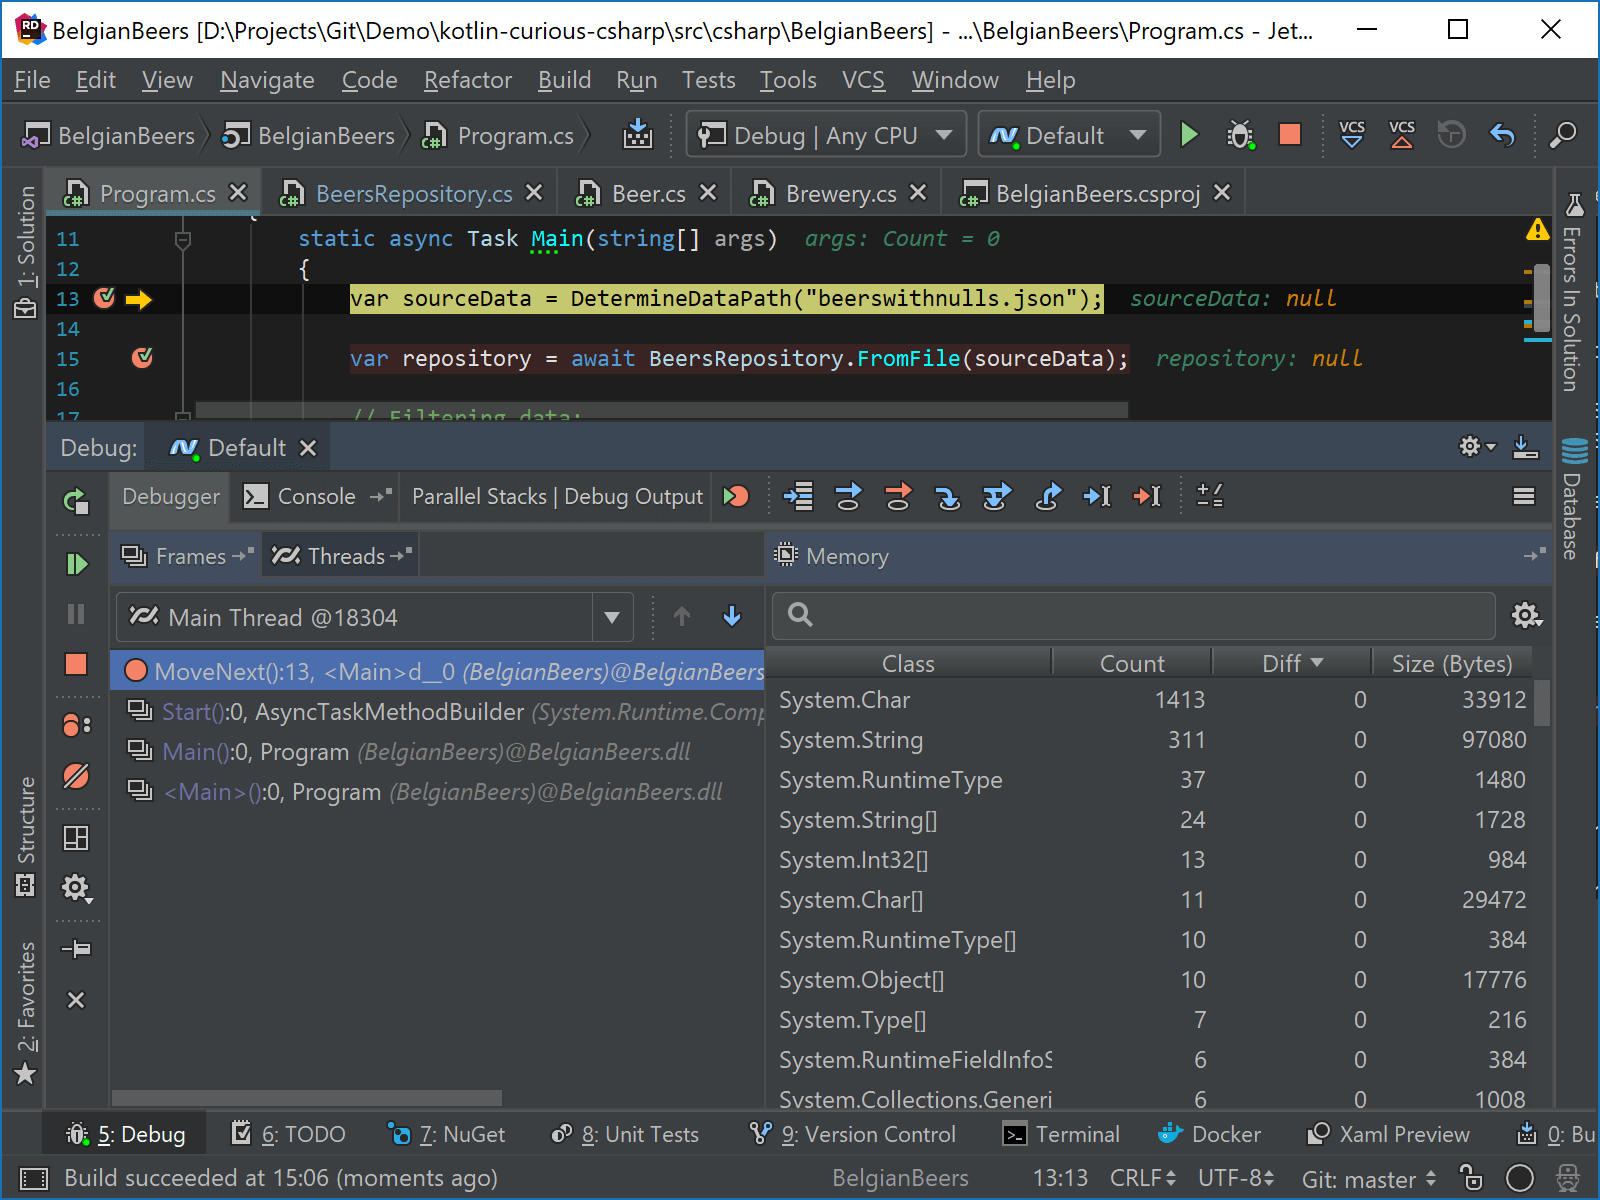 See the number of objects changes between debugger stops